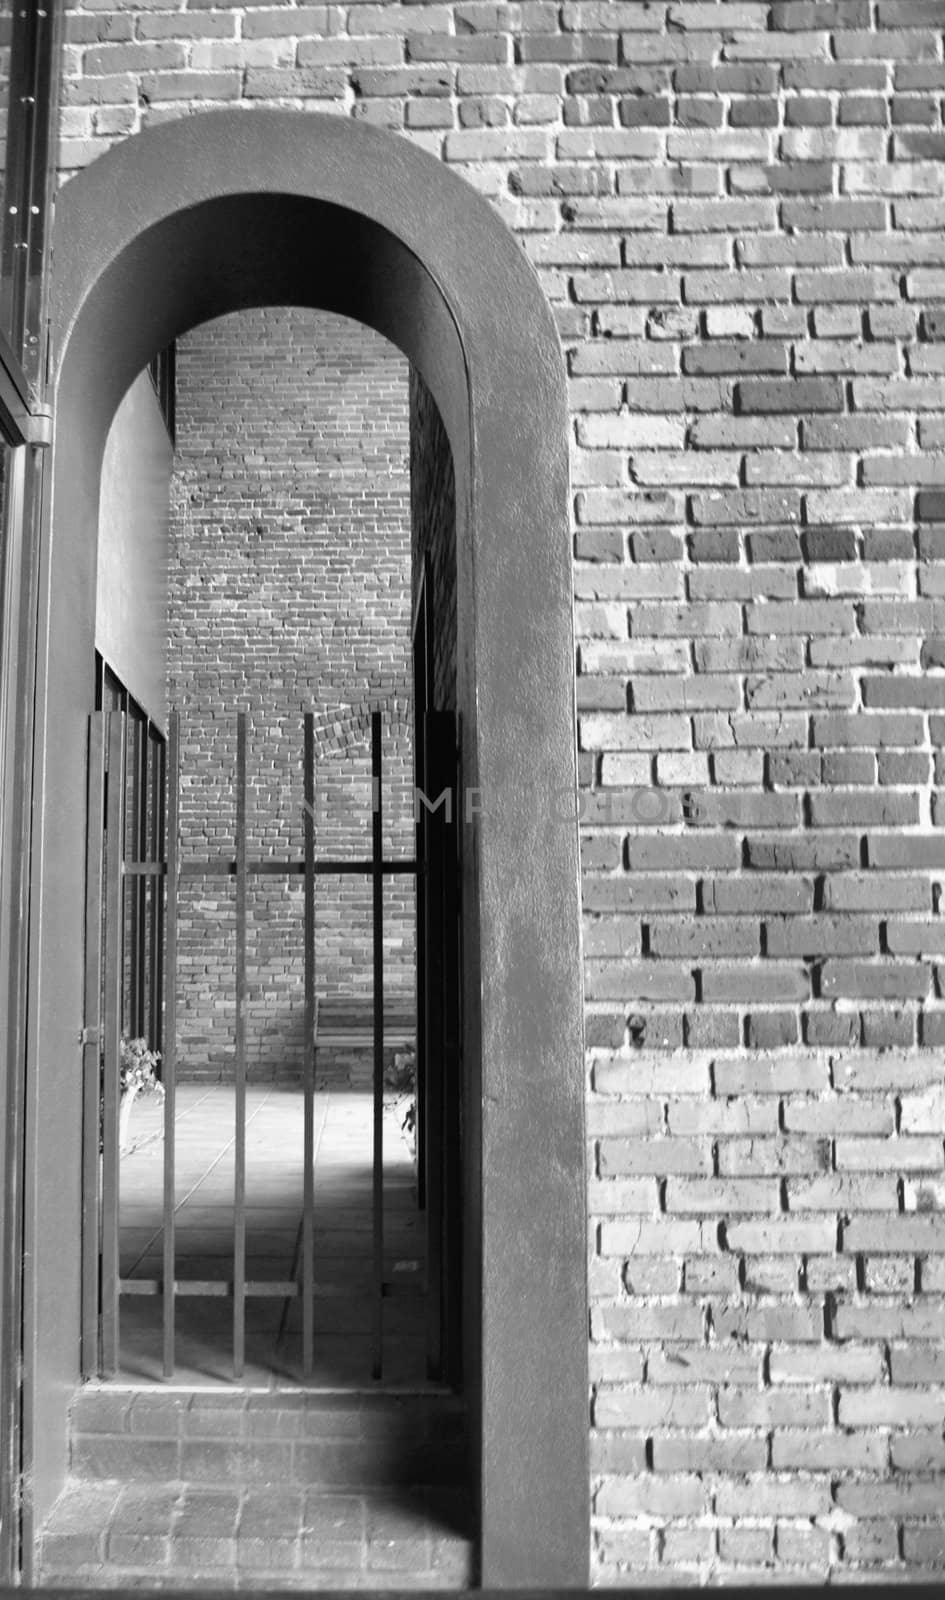 narrow doorway with a gate shown in black and white